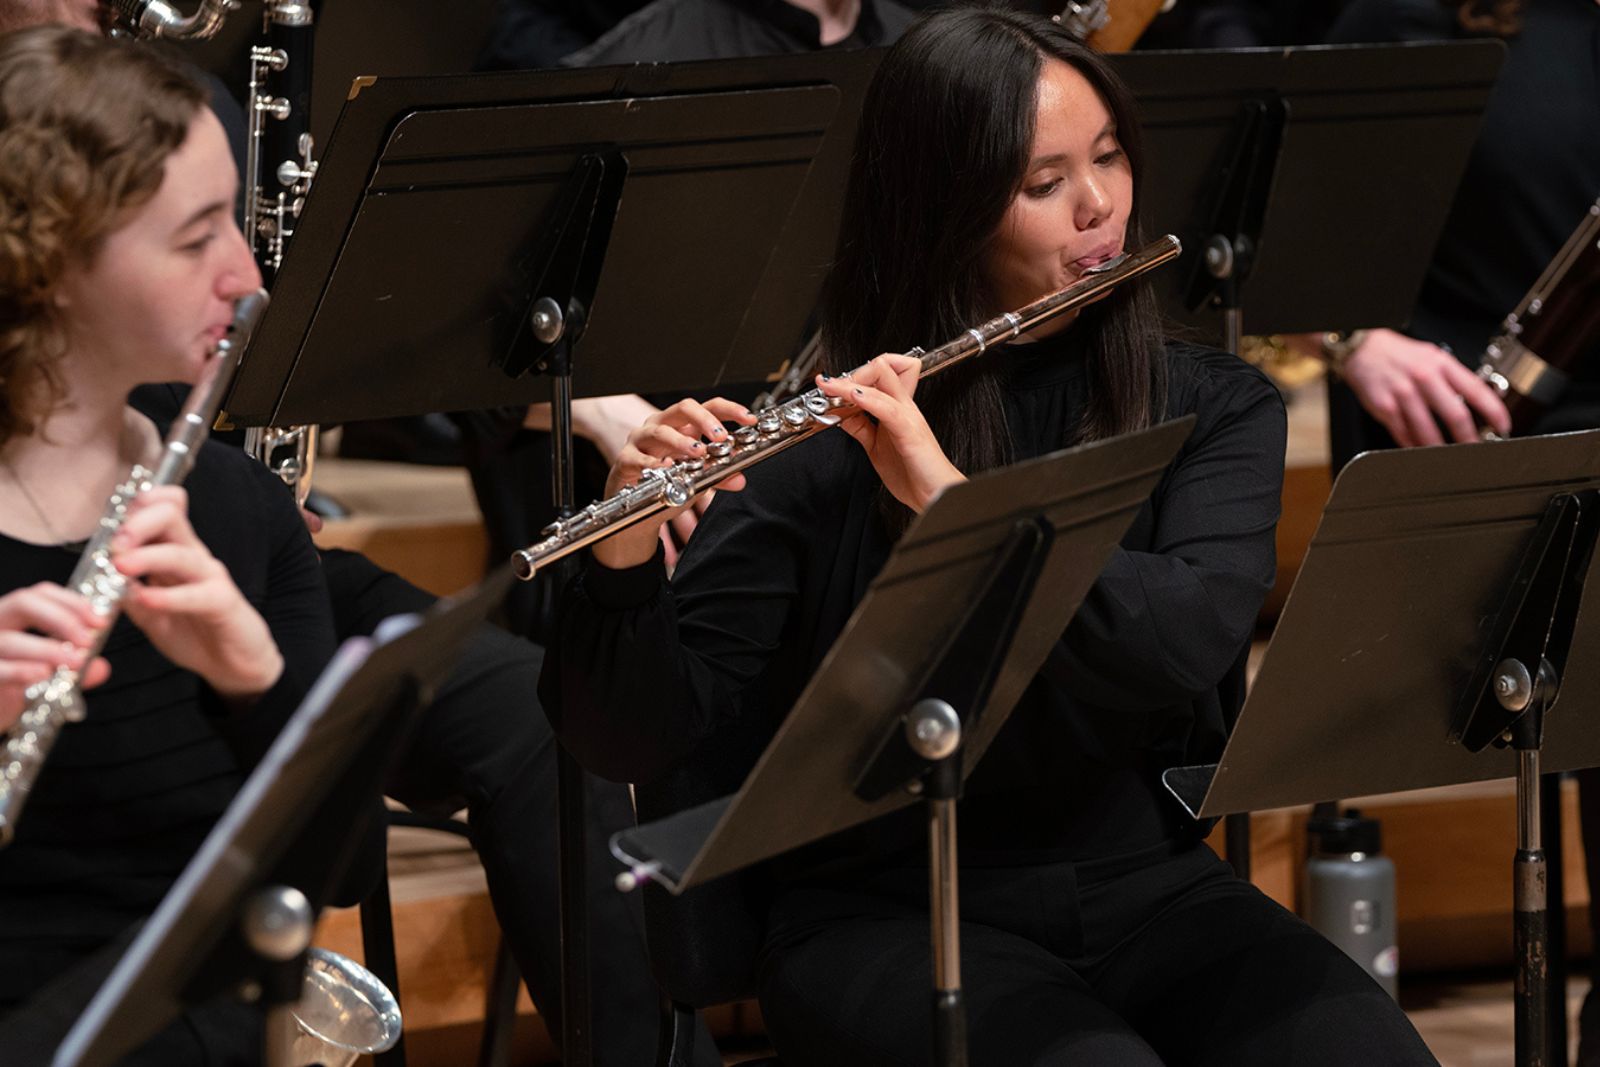 Two members of the UMD Wind Orchestra play flute during a concert.